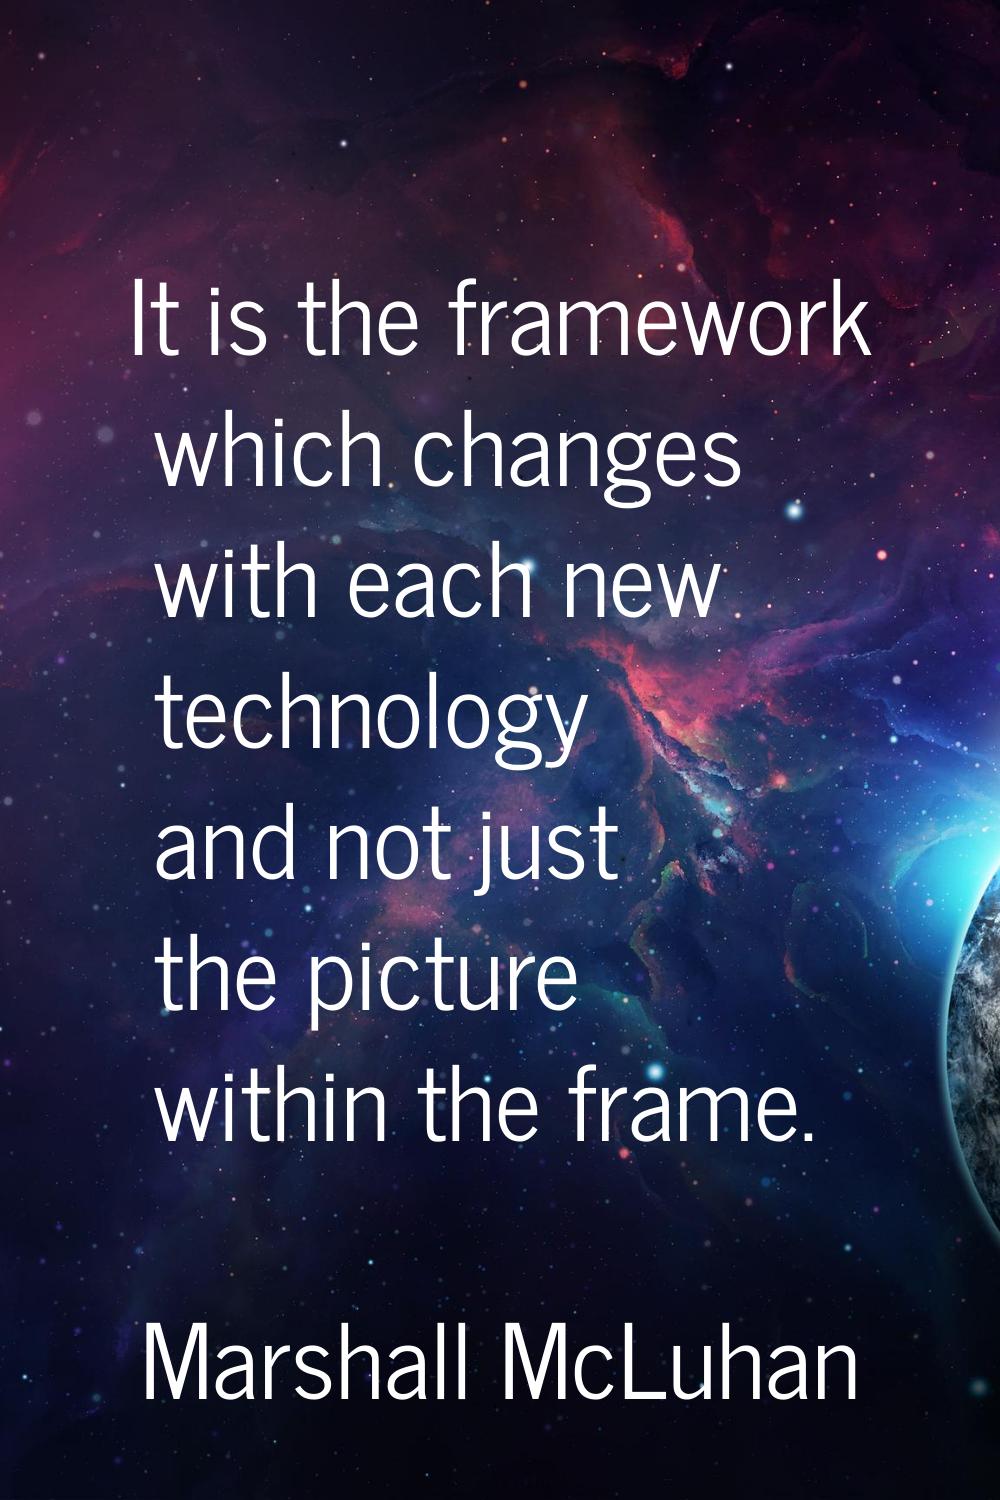 It is the framework which changes with each new technology and not just the picture within the fram